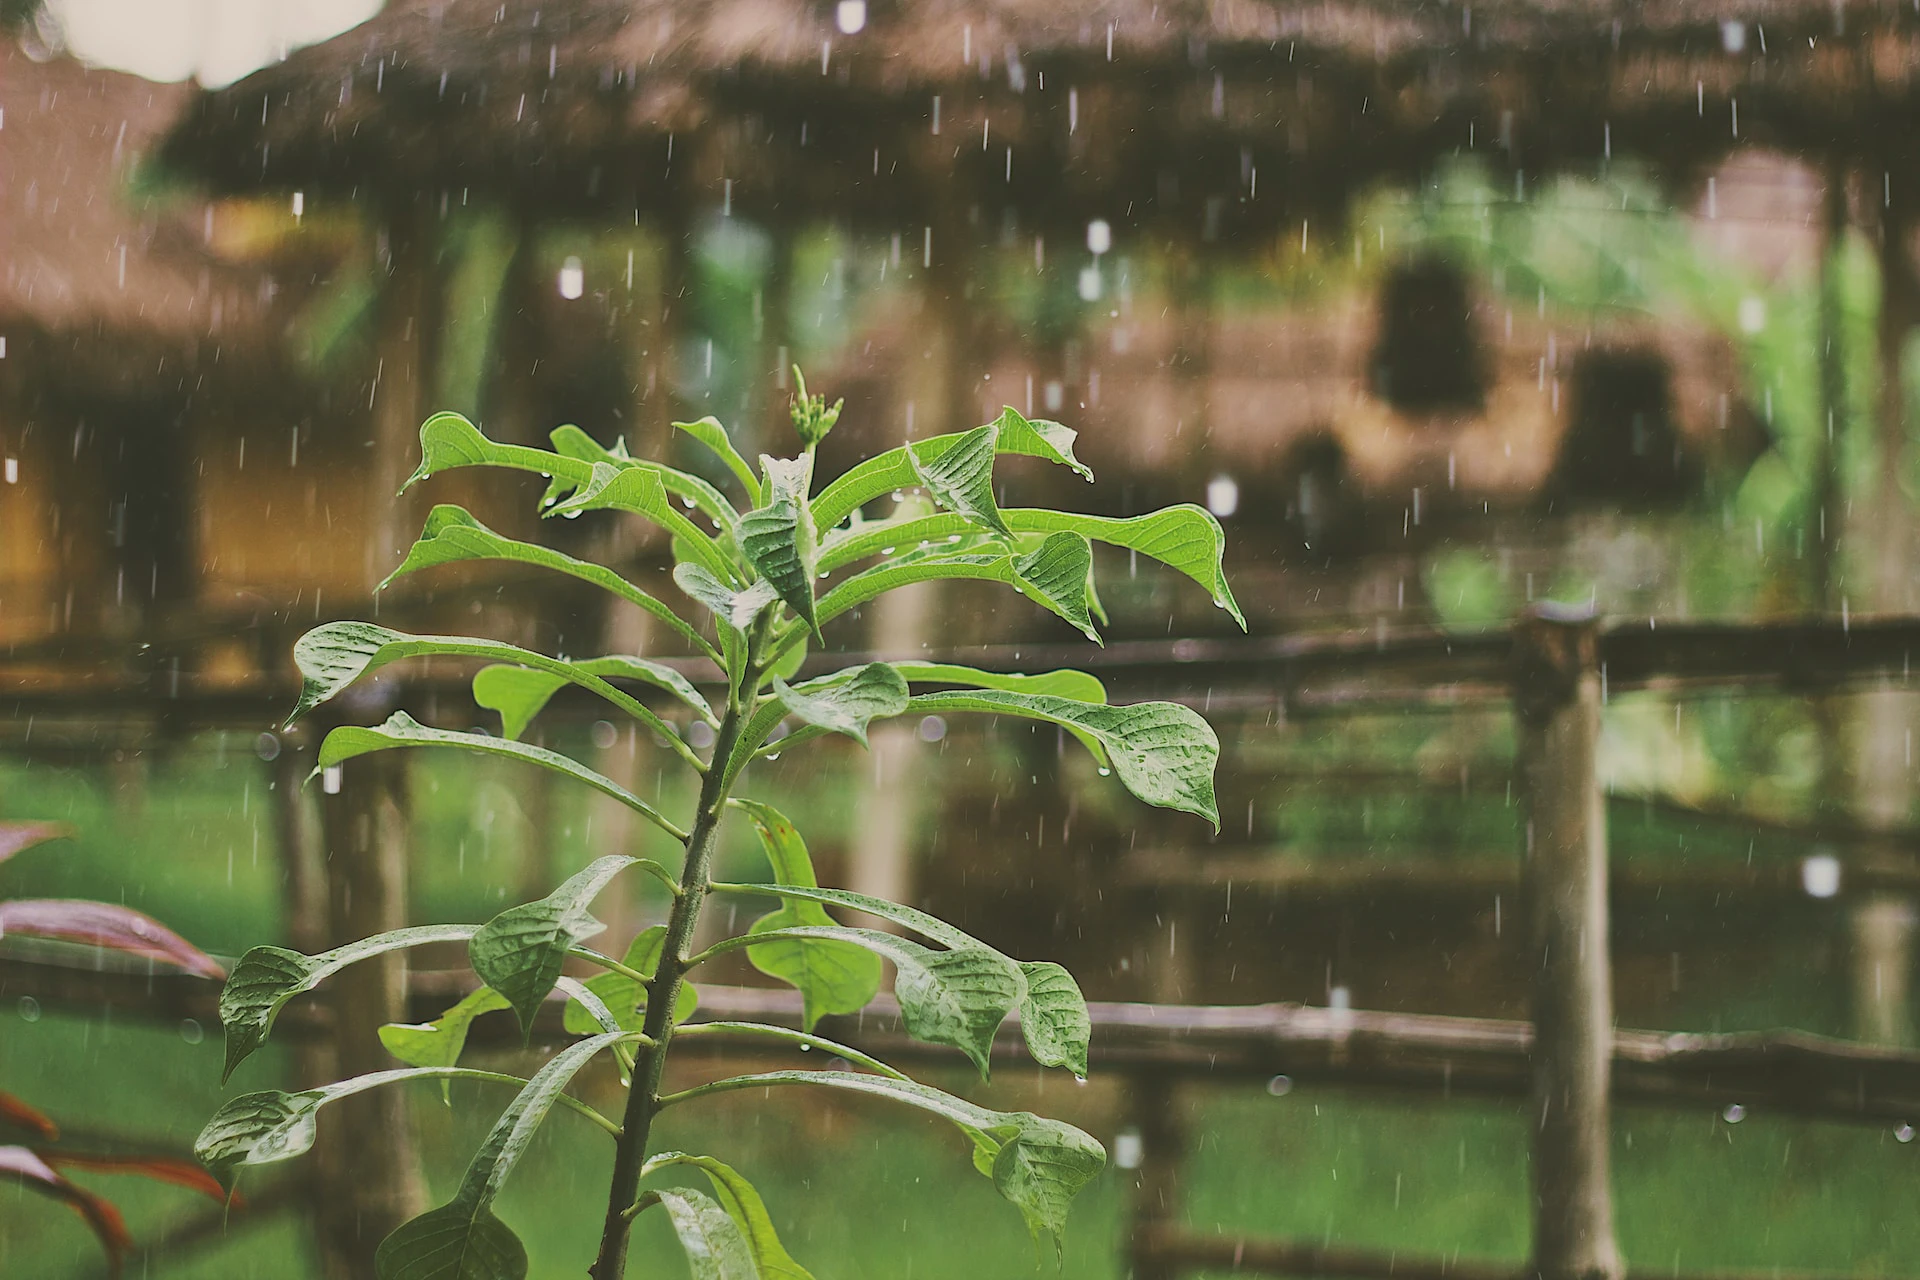 Plant getting rained on in front of wooden fence